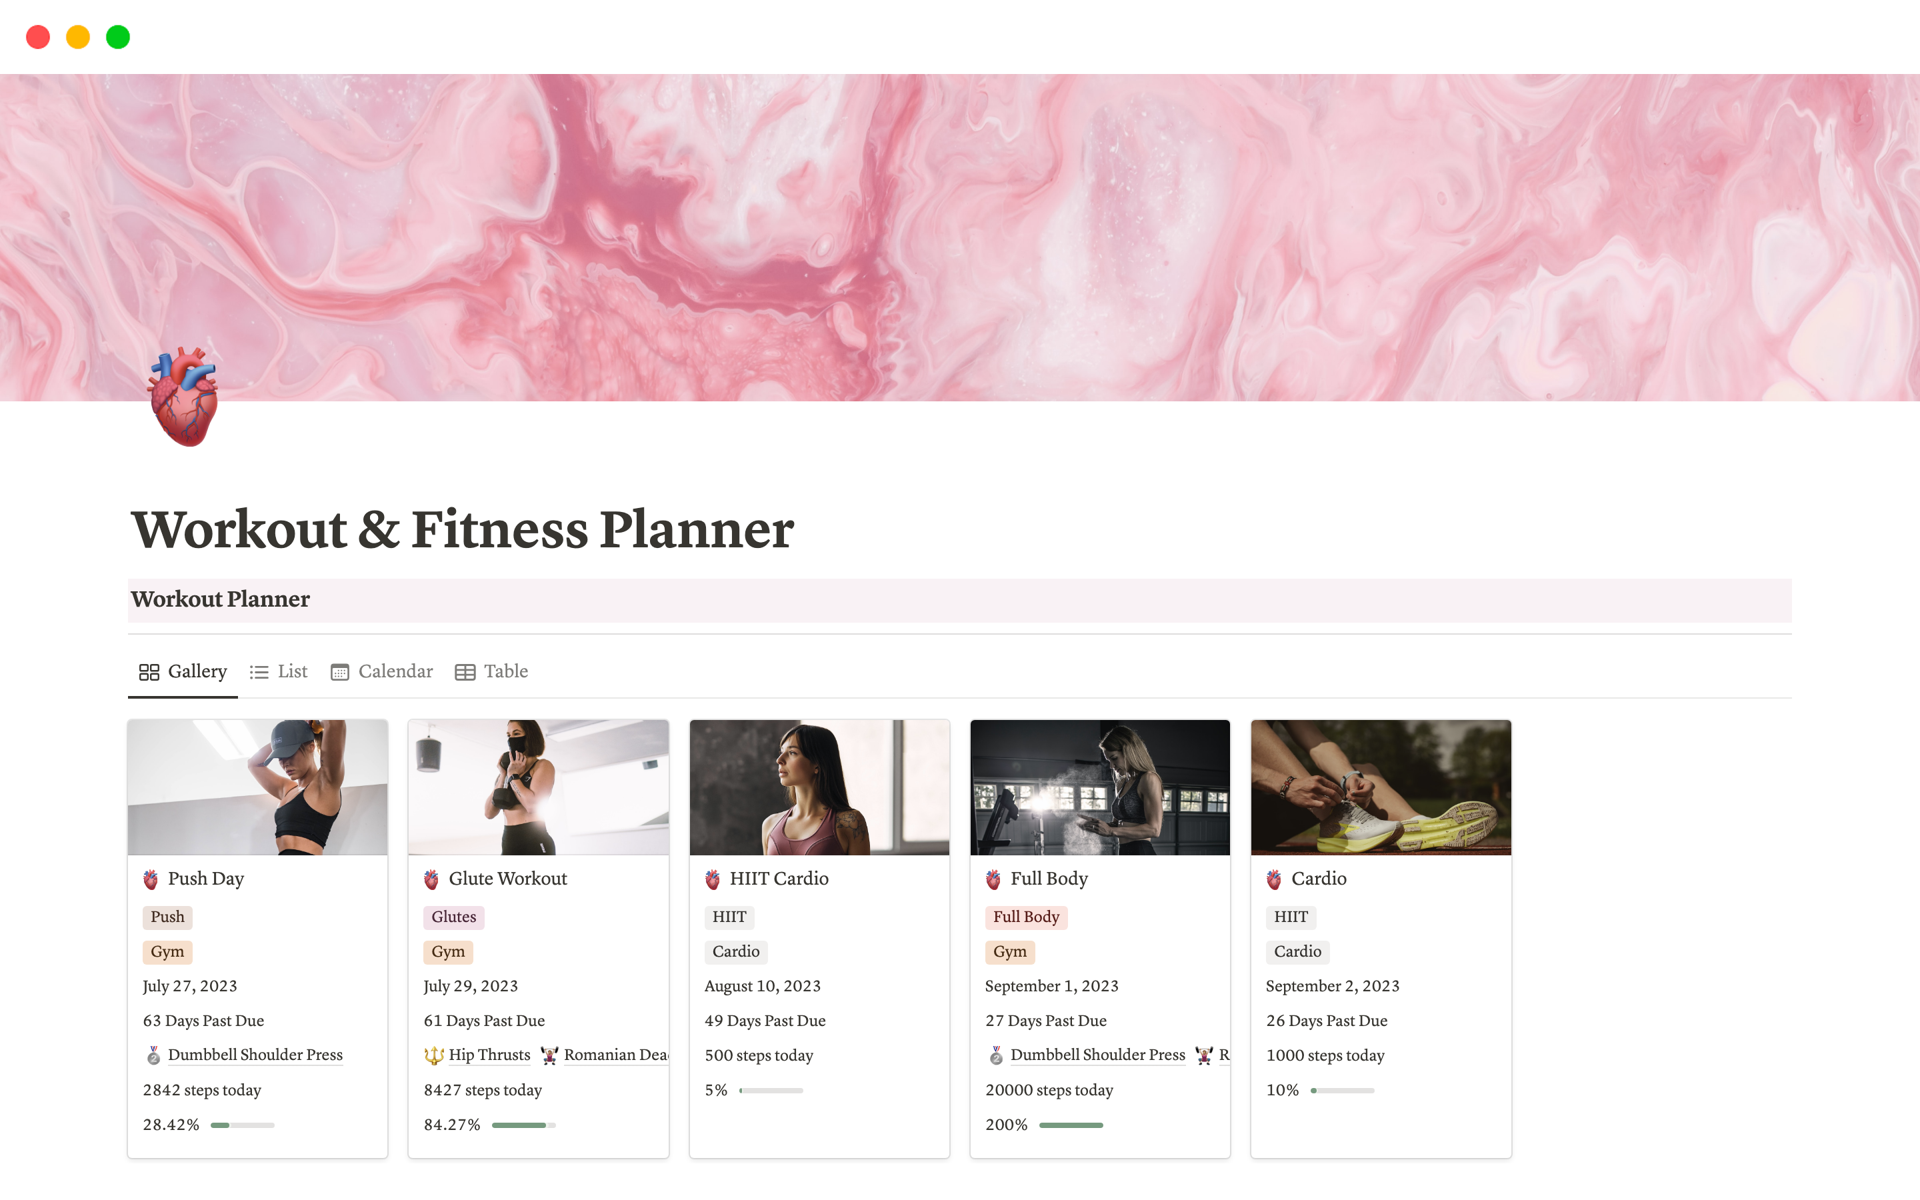 Meal & Nutrition Planner